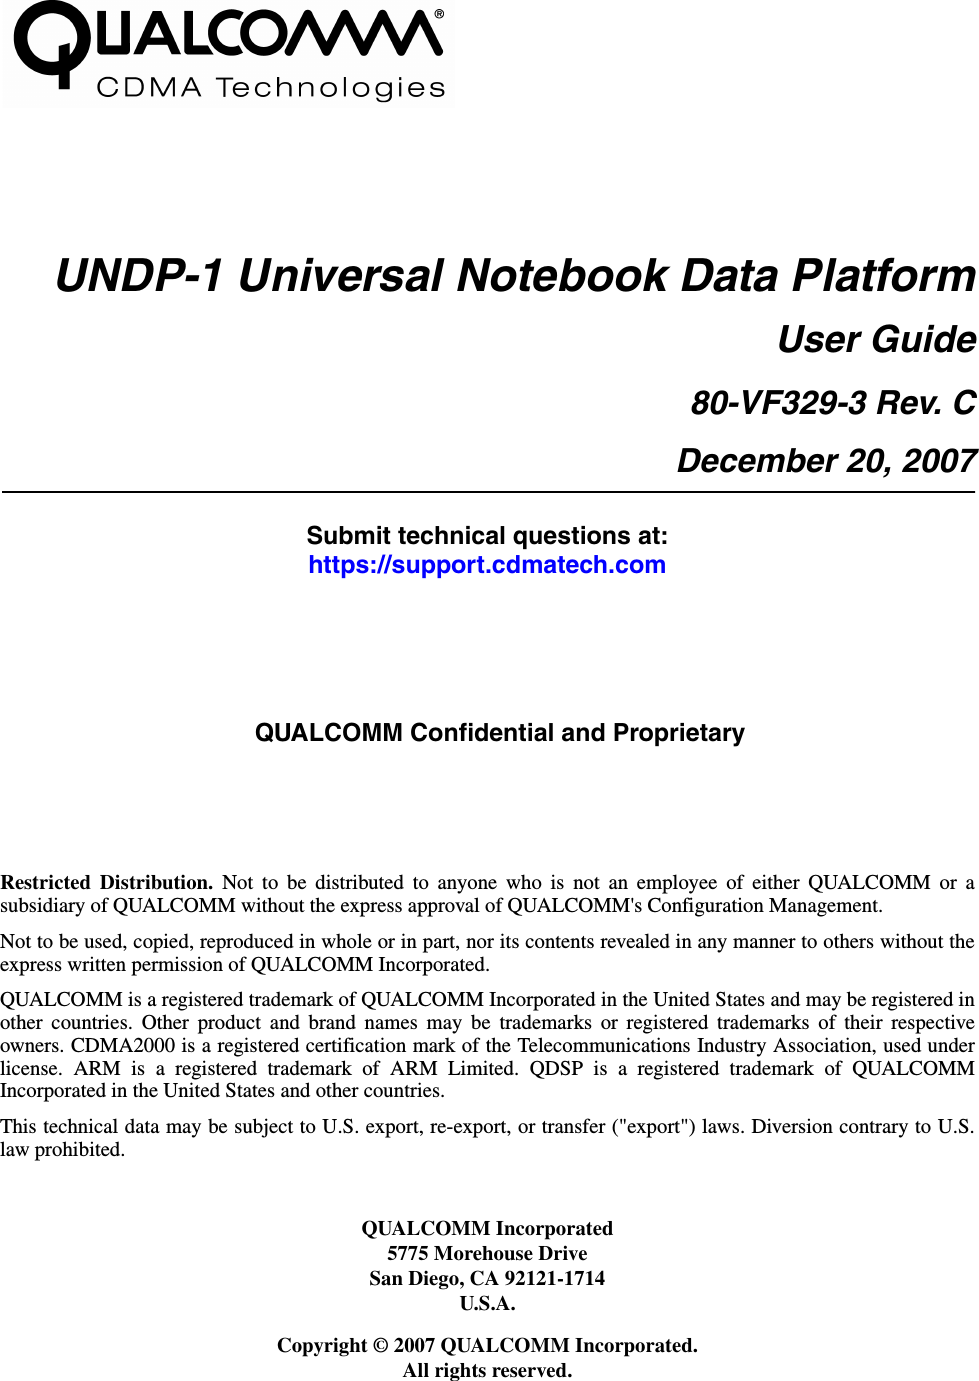 UNDP-1 Universal Notebook Data PlatformUser Guide80-VF329-3 Rev. CDecember 20, 2007Submit technical questions at:https://support.cdmatech.comRestricted Distribution. Not to be distributed to anyone who is not an employee of either QUALCOMM or asubsidiary of QUALCOMM without the express approval of QUALCOMM&apos;s Configuration Management.Not to be used, copied, reproduced in whole or in part, nor its contents revealed in any manner to others without theexpress written permission of QUALCOMM Incorporated.QUALCOMM is a registered trademark of QUALCOMM Incorporated in the United States and may be registered inother countries. Other product and brand names may be trademarks or registered trademarks of their respectiveowners. CDMA2000 is a registered certification mark of the Telecommunications Industry Association, used underlicense. ARM is a registered trademark of ARM Limited. QDSP is a registered trademark of QUALCOMMIncorporated in the United States and other countries.This technical data may be subject to U.S. export, re-export, or transfer (&quot;export&quot;) laws. Diversion contrary to U.S.law prohibited.QUALCOMM Incorporated5775 Morehouse DriveSan Diego, CA 92121-1714U.S.A.Copyright © 2007 QUALCOMM Incorporated. All rights reserved.QUALCOMM Confidential and Proprietary